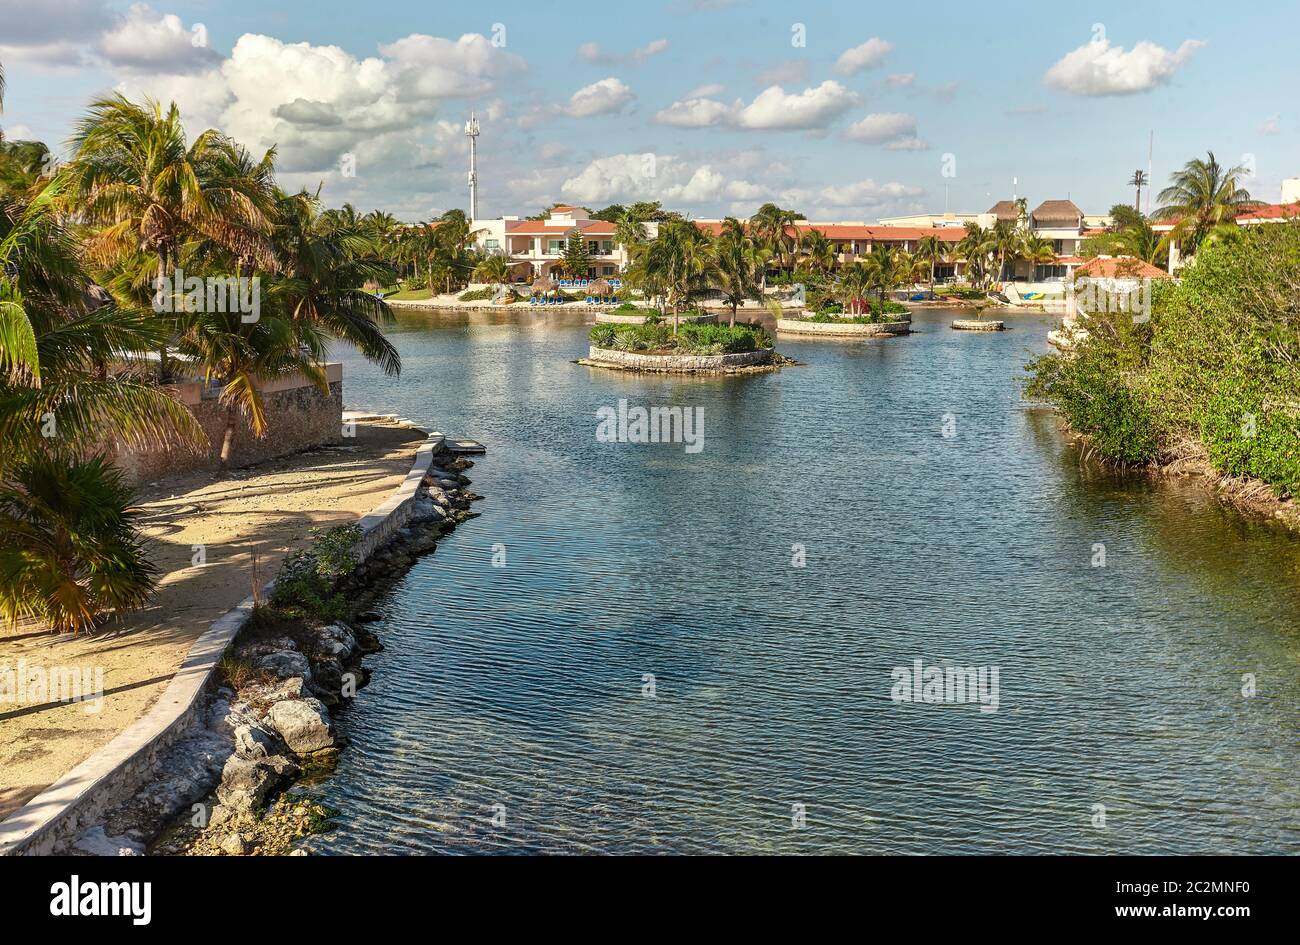 Residential area of Puerto aventuras in mexico, with luxurious private homes overlooking the waterway that leads directly to the sea and the beach. Stock Photo